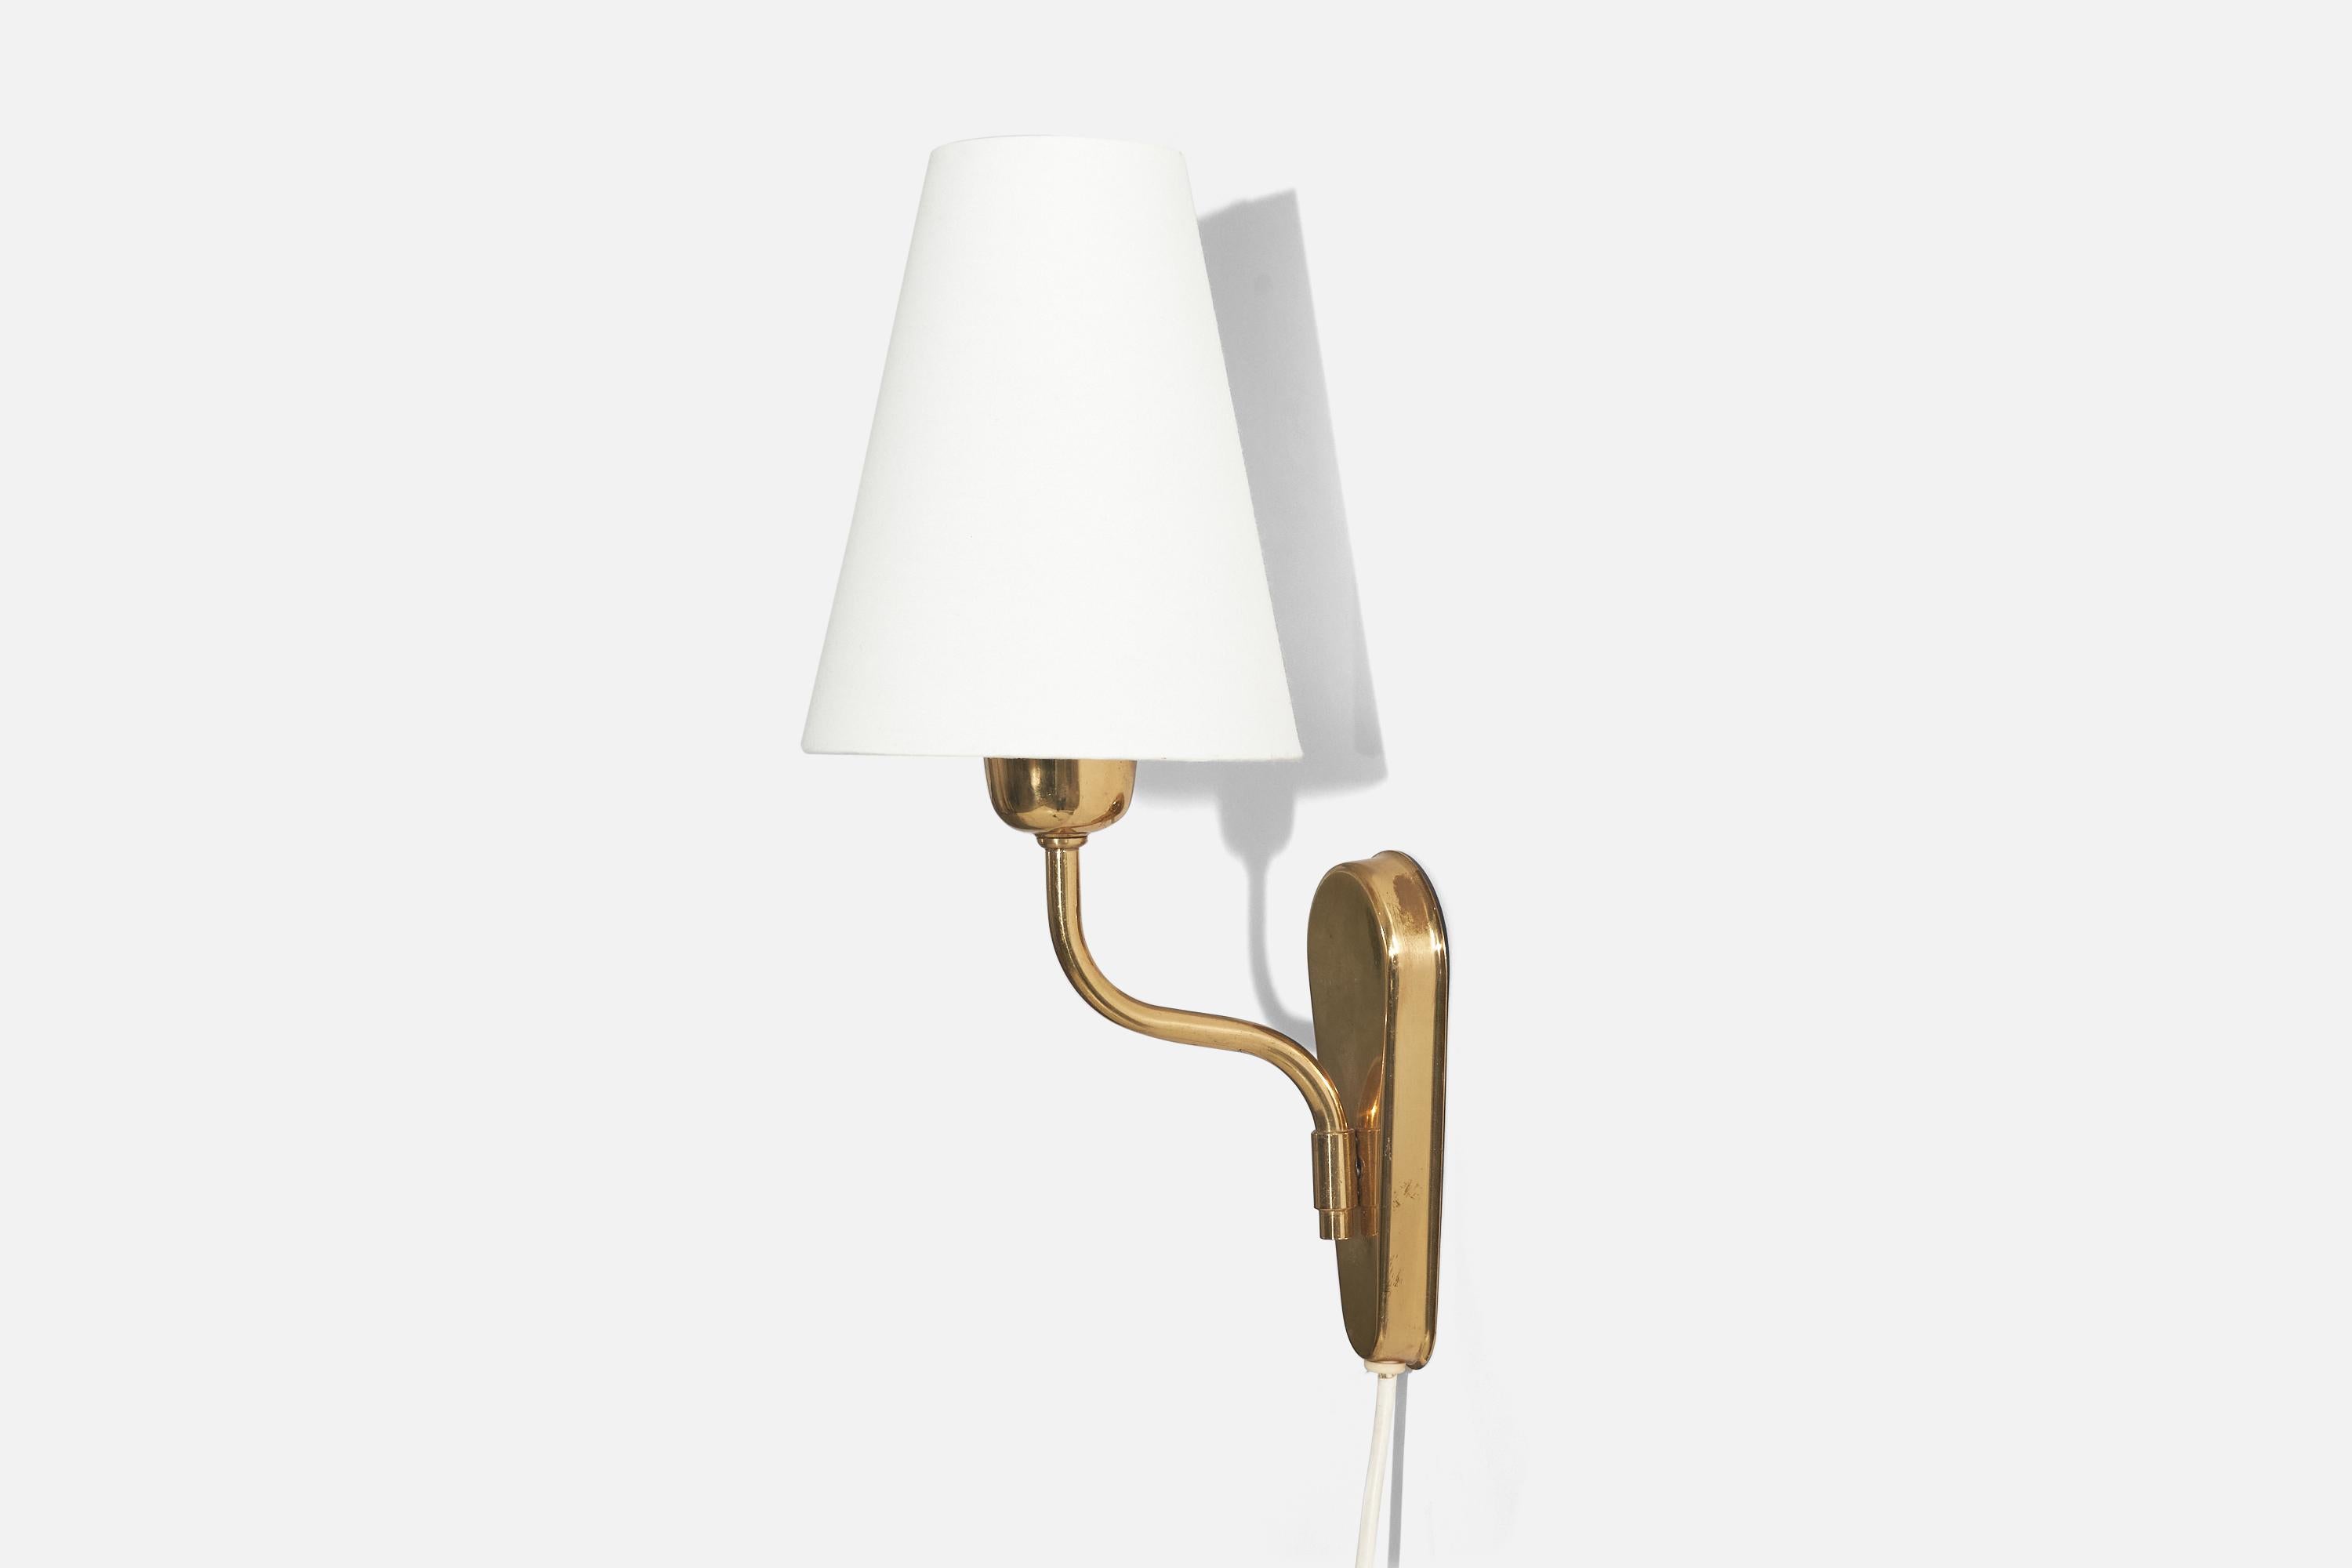 Fog & Mørup, Sconce, Brass, Fabric, Denmark, c. 1950s In Good Condition For Sale In High Point, NC